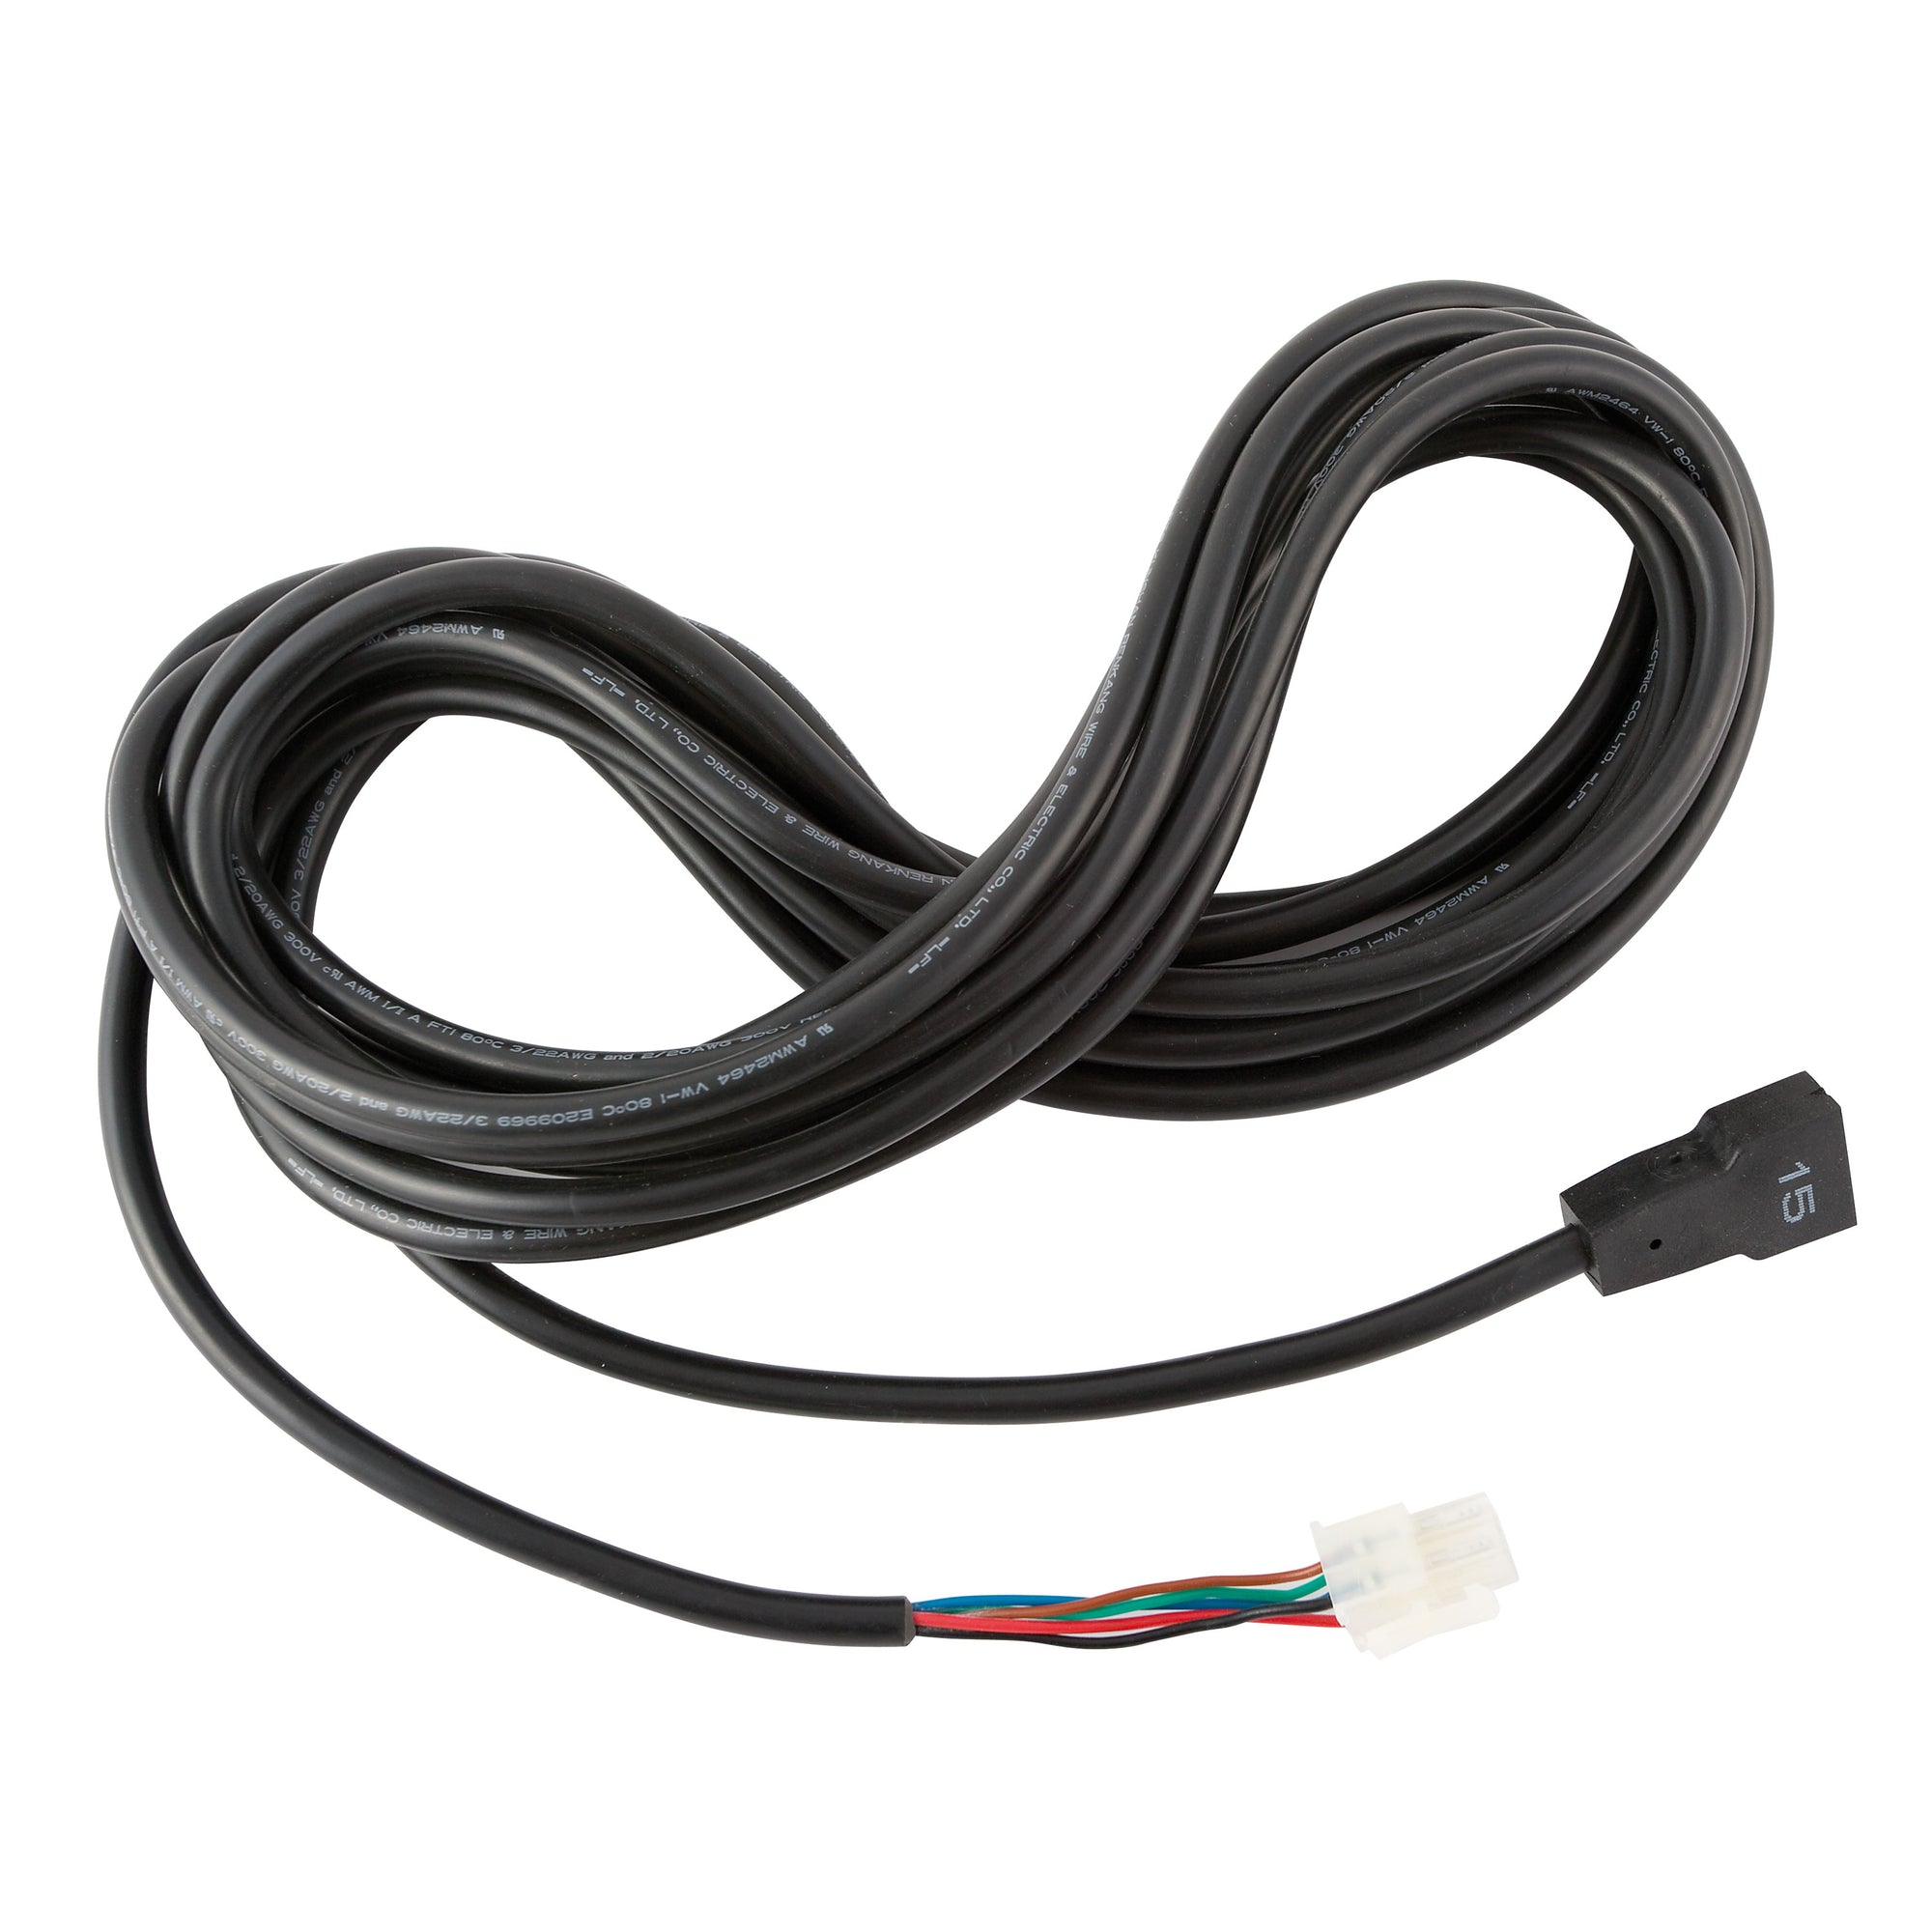 Lippert 247768 6-Pin Controller-to-Motor Harness - 15' (Male-to-Female)